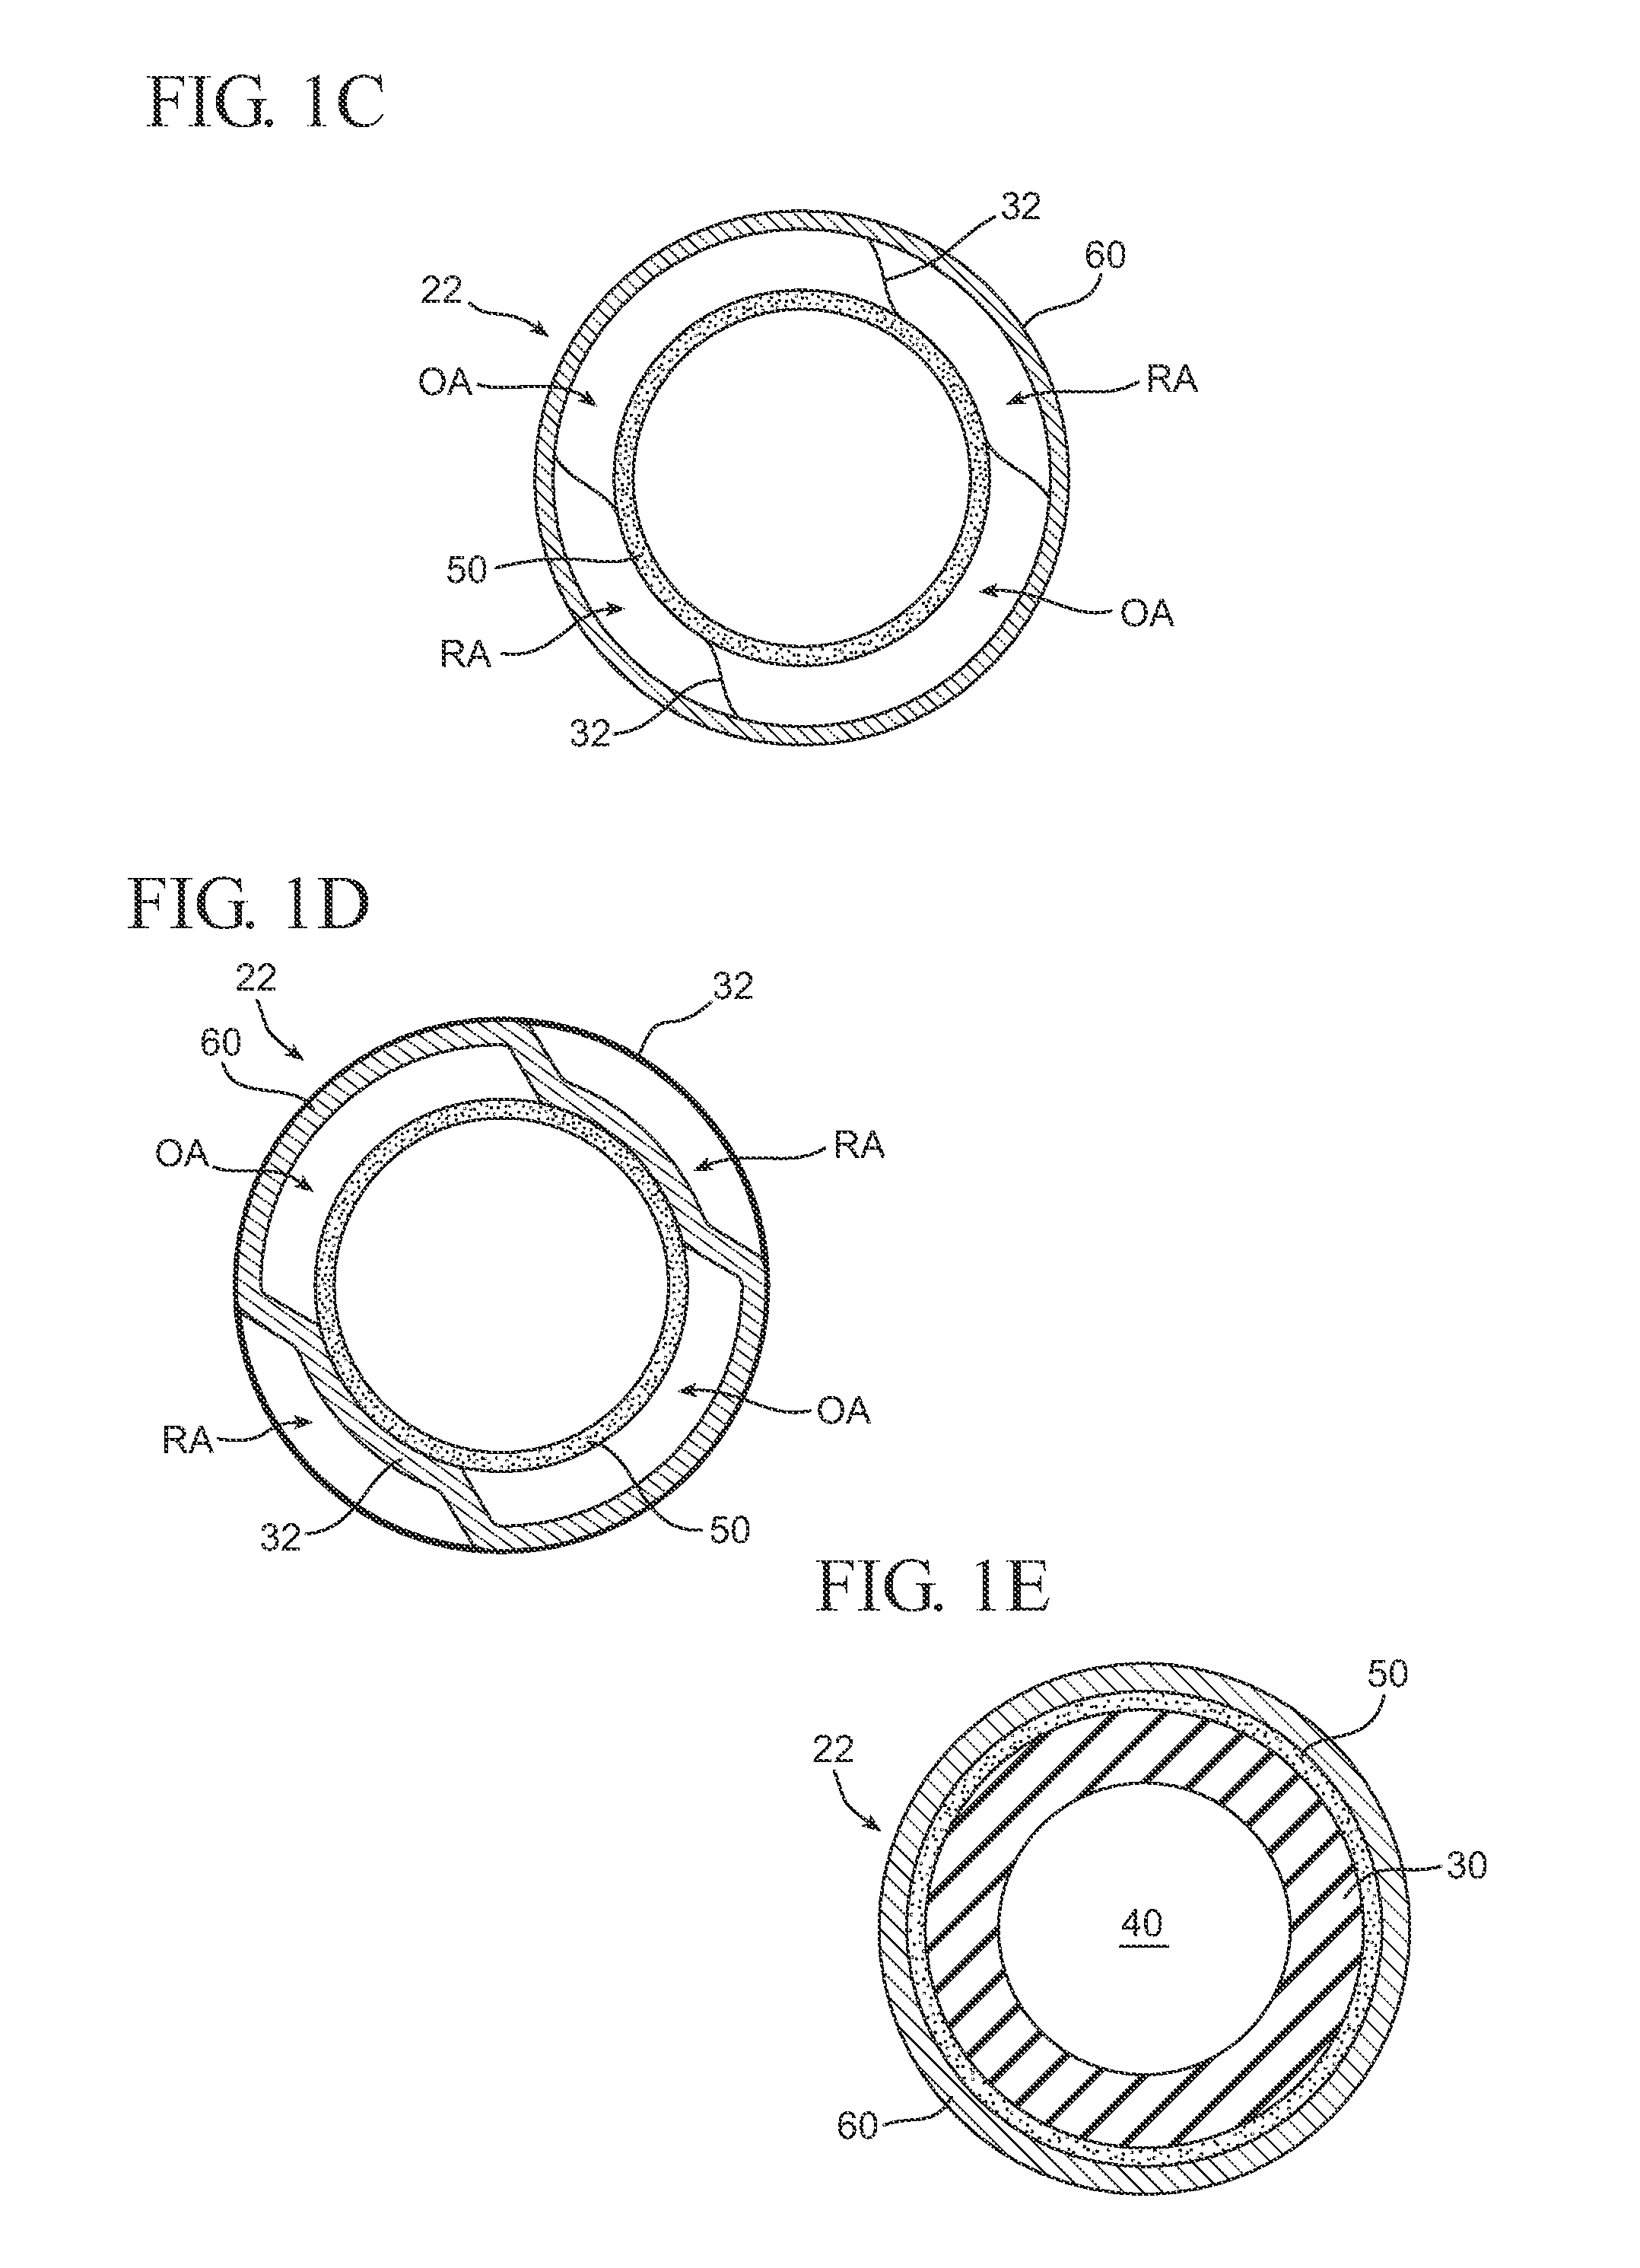 Fluid filled implants for treating medical conditions